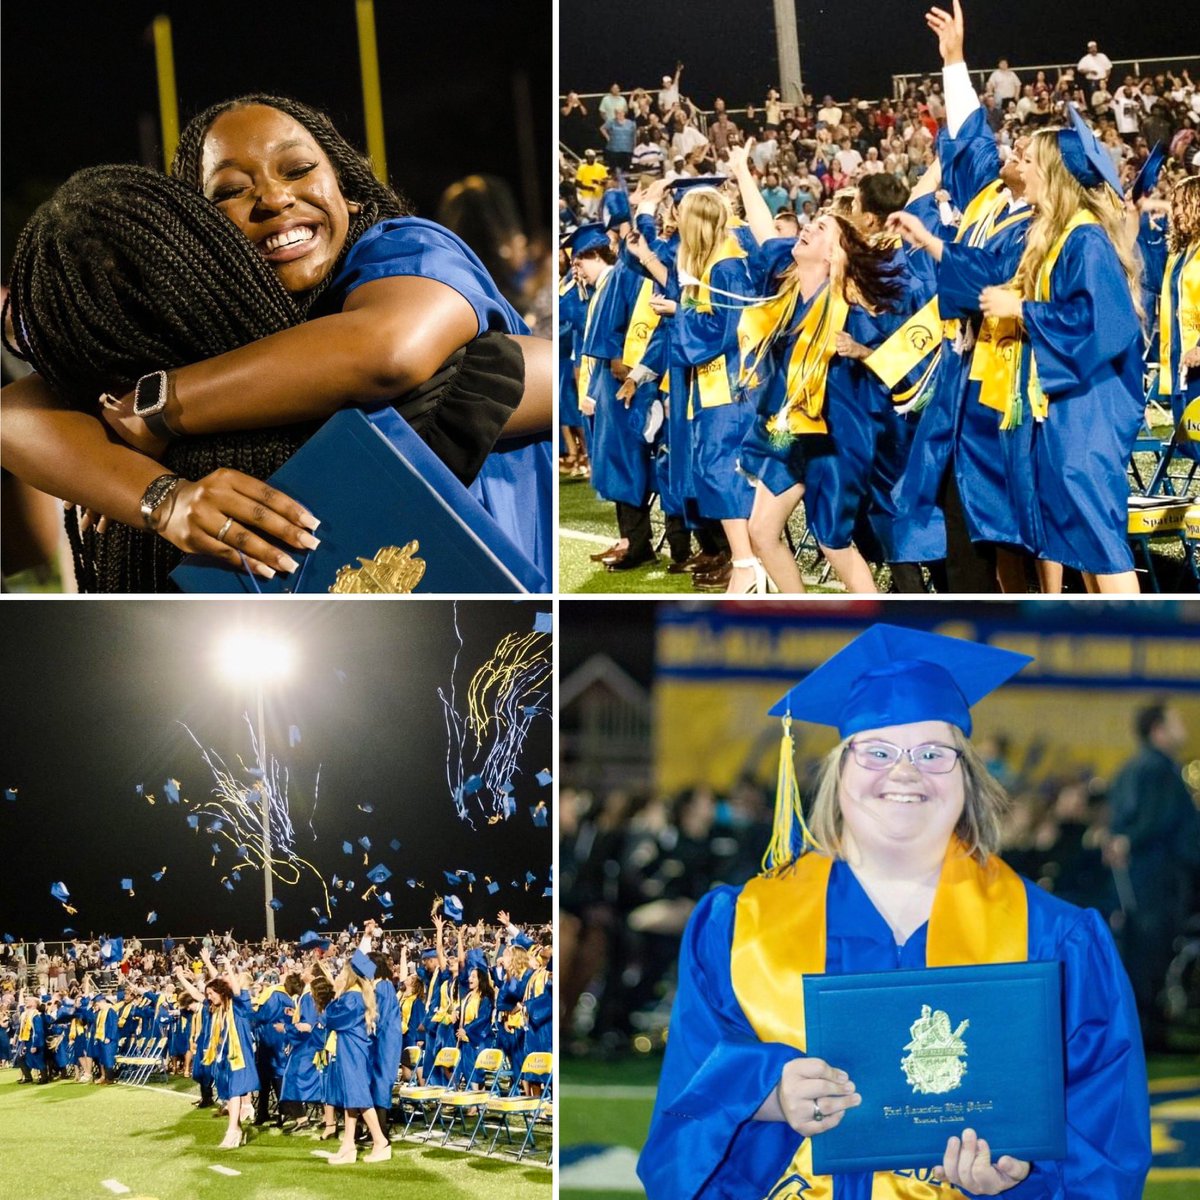 It has been said that pictures are with a thousand words -- these Spartan smiles definitely say everything that needs to be said!  Once a Spartan, ALWAYS a Spartan!  #wEAre #begrEAt #ExcellenceAlways